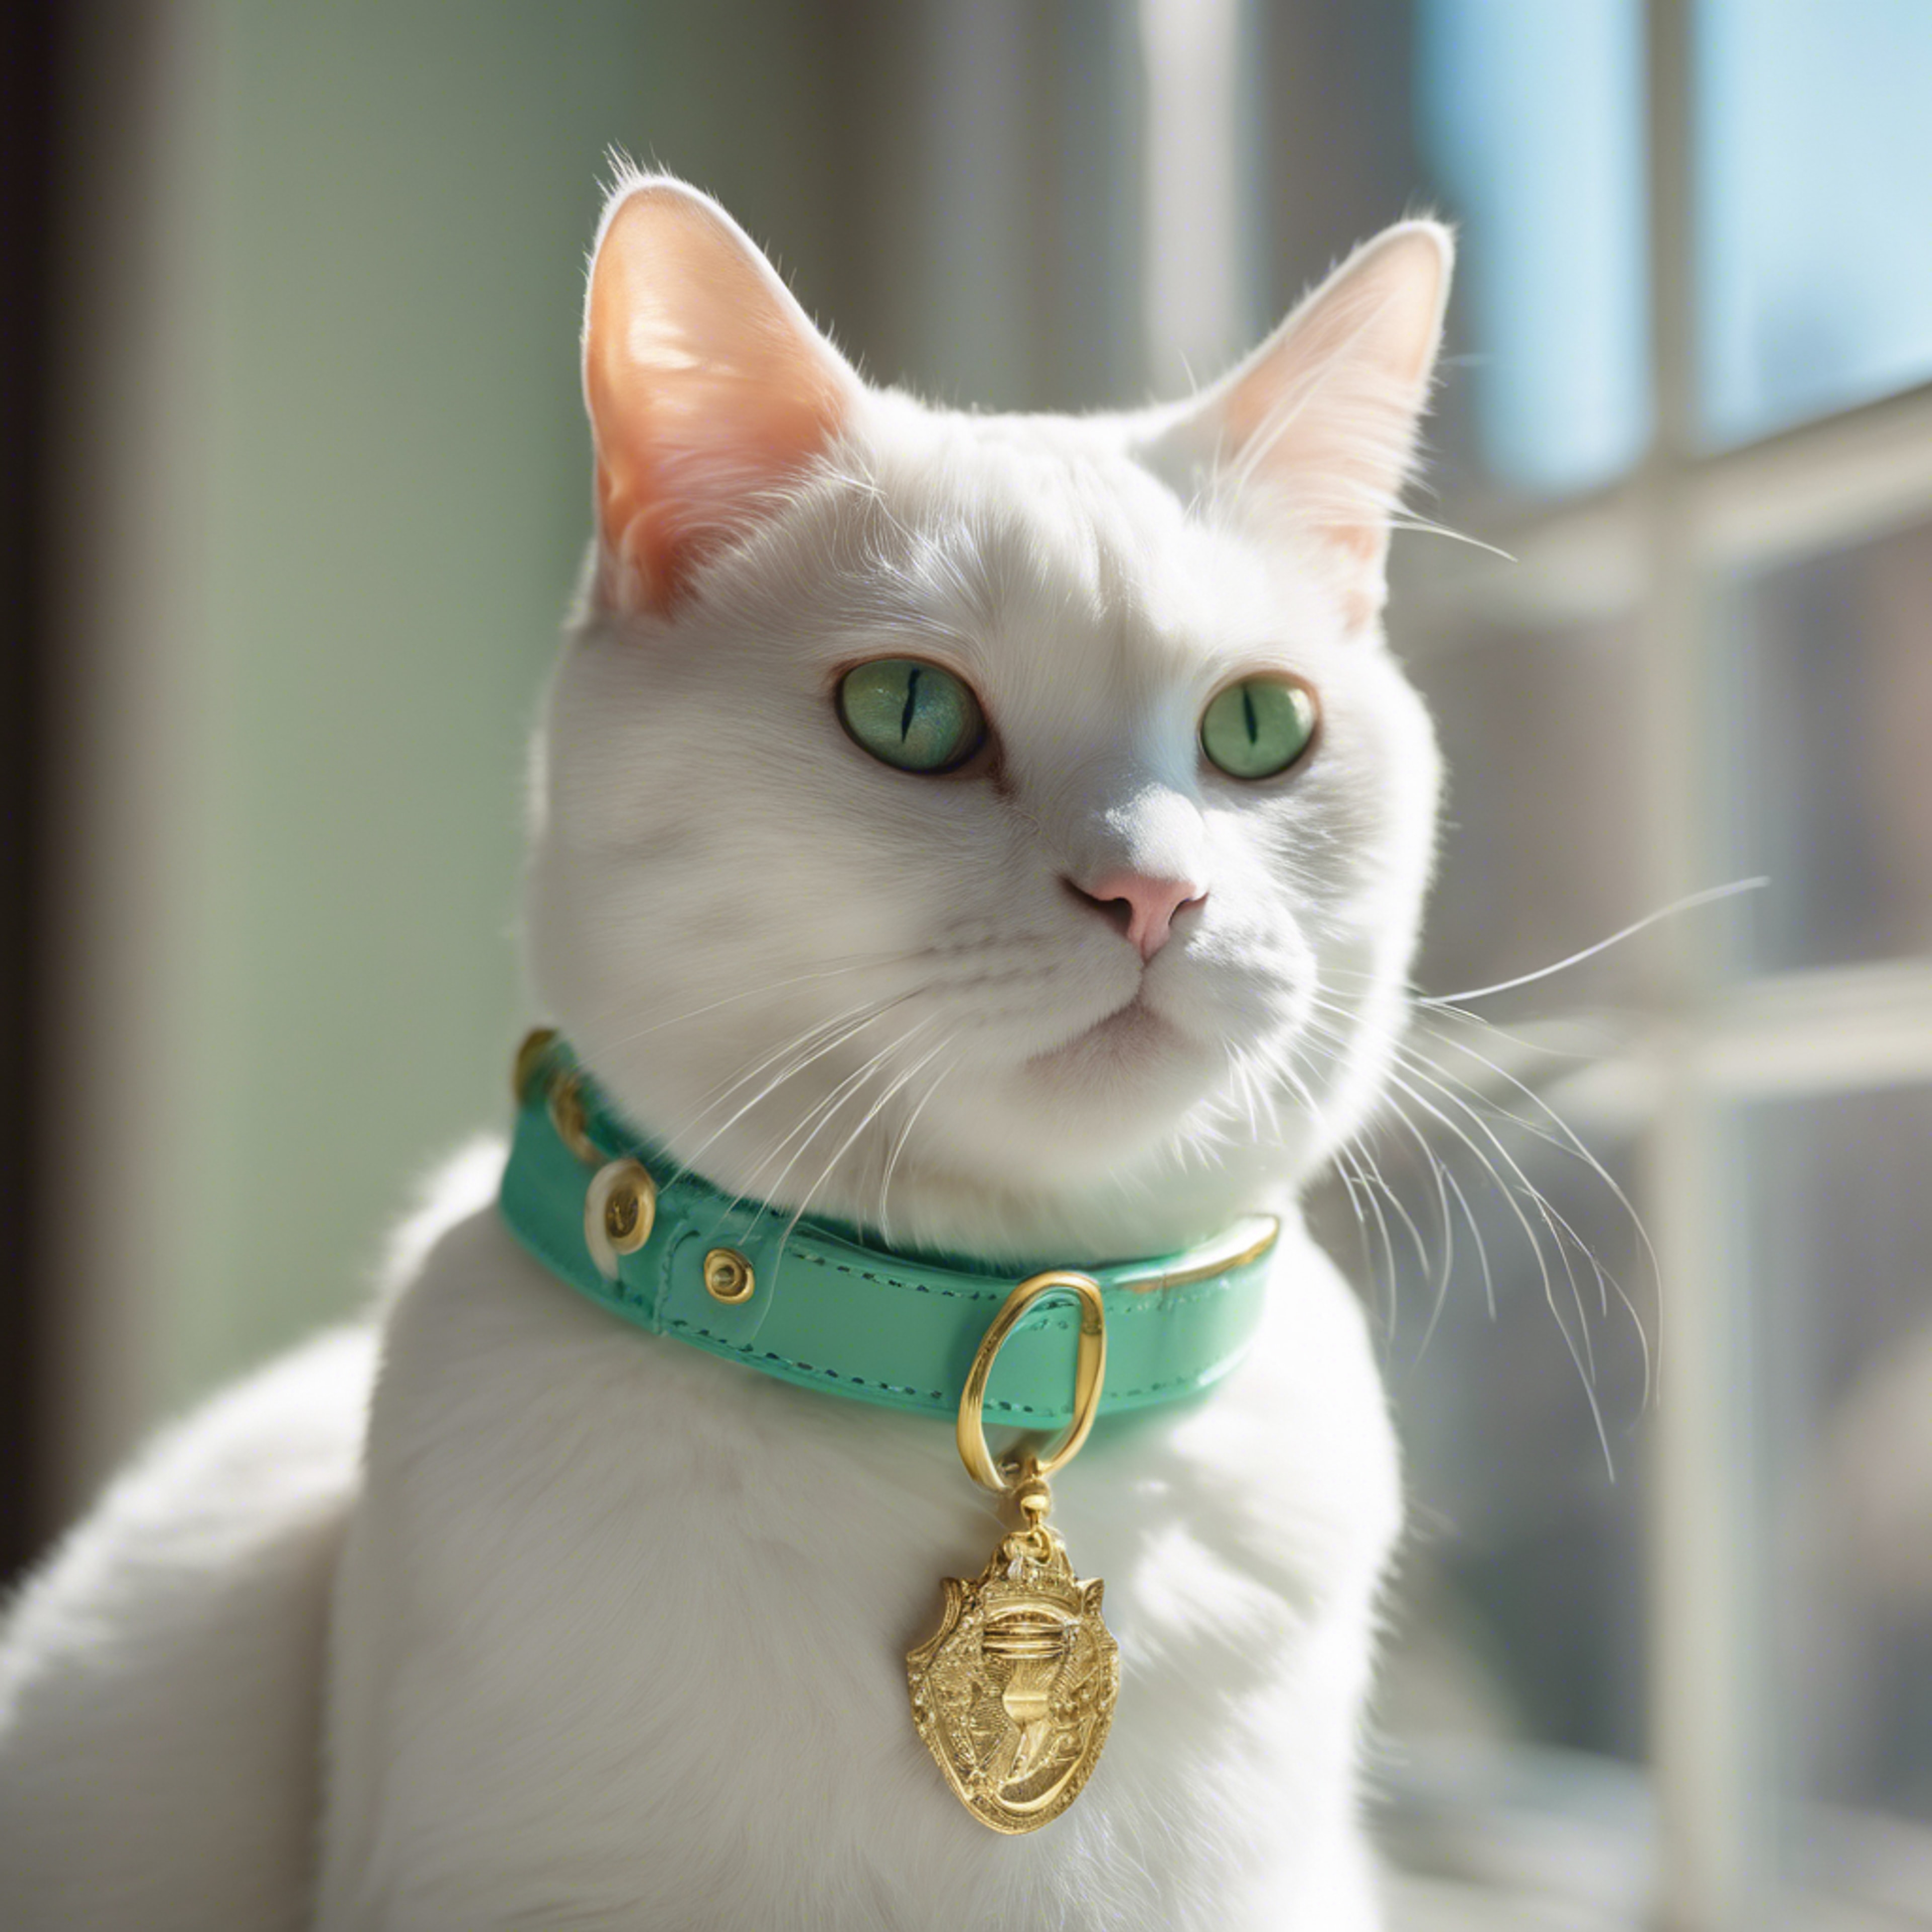 An adorable white cat wearing a preppy mint green collar with a gold buckle sitting in a sunny window. Tapeta na zeď[8de0351476e04873aa5e]